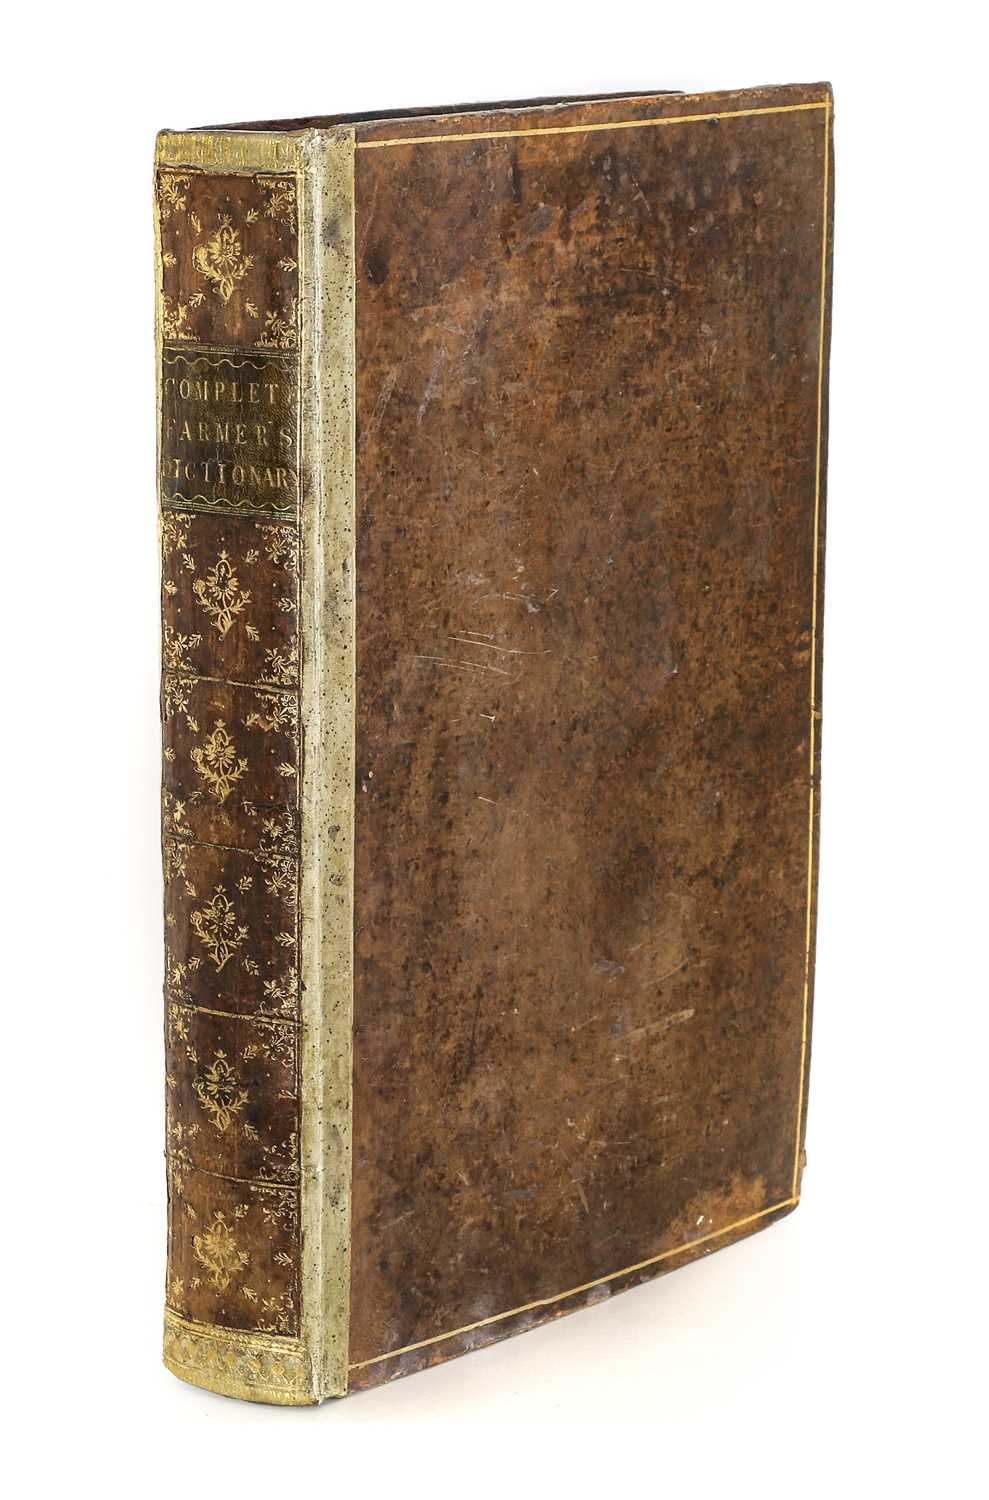 Lot 147 - SOCIETY of GENTLEMEN. The Complete Farmer: or,...